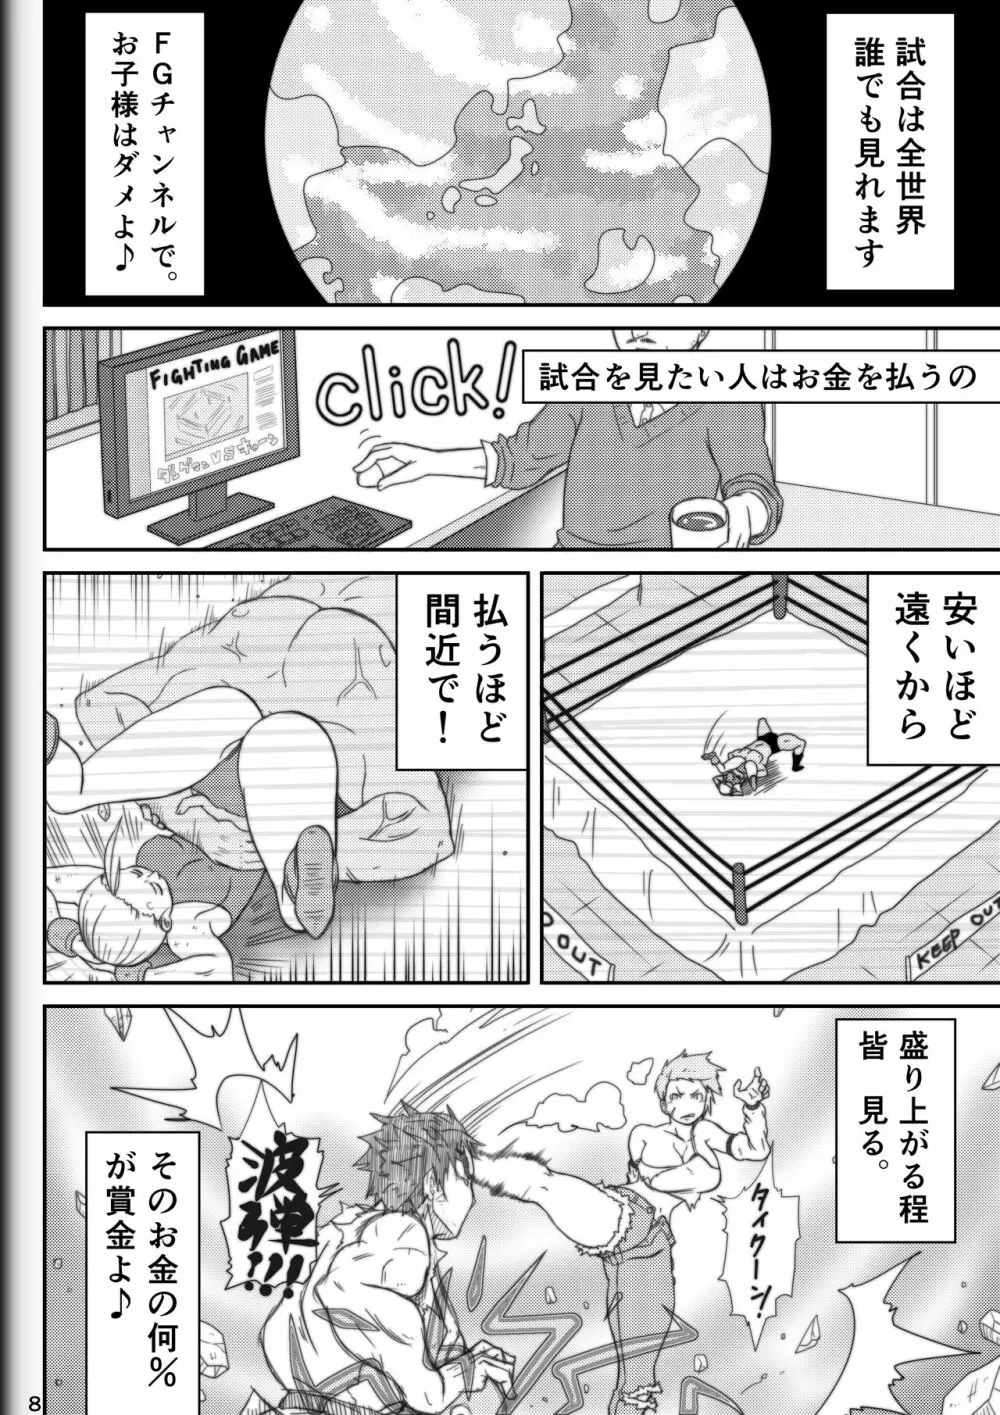 Fighting Game New 2 Page.10